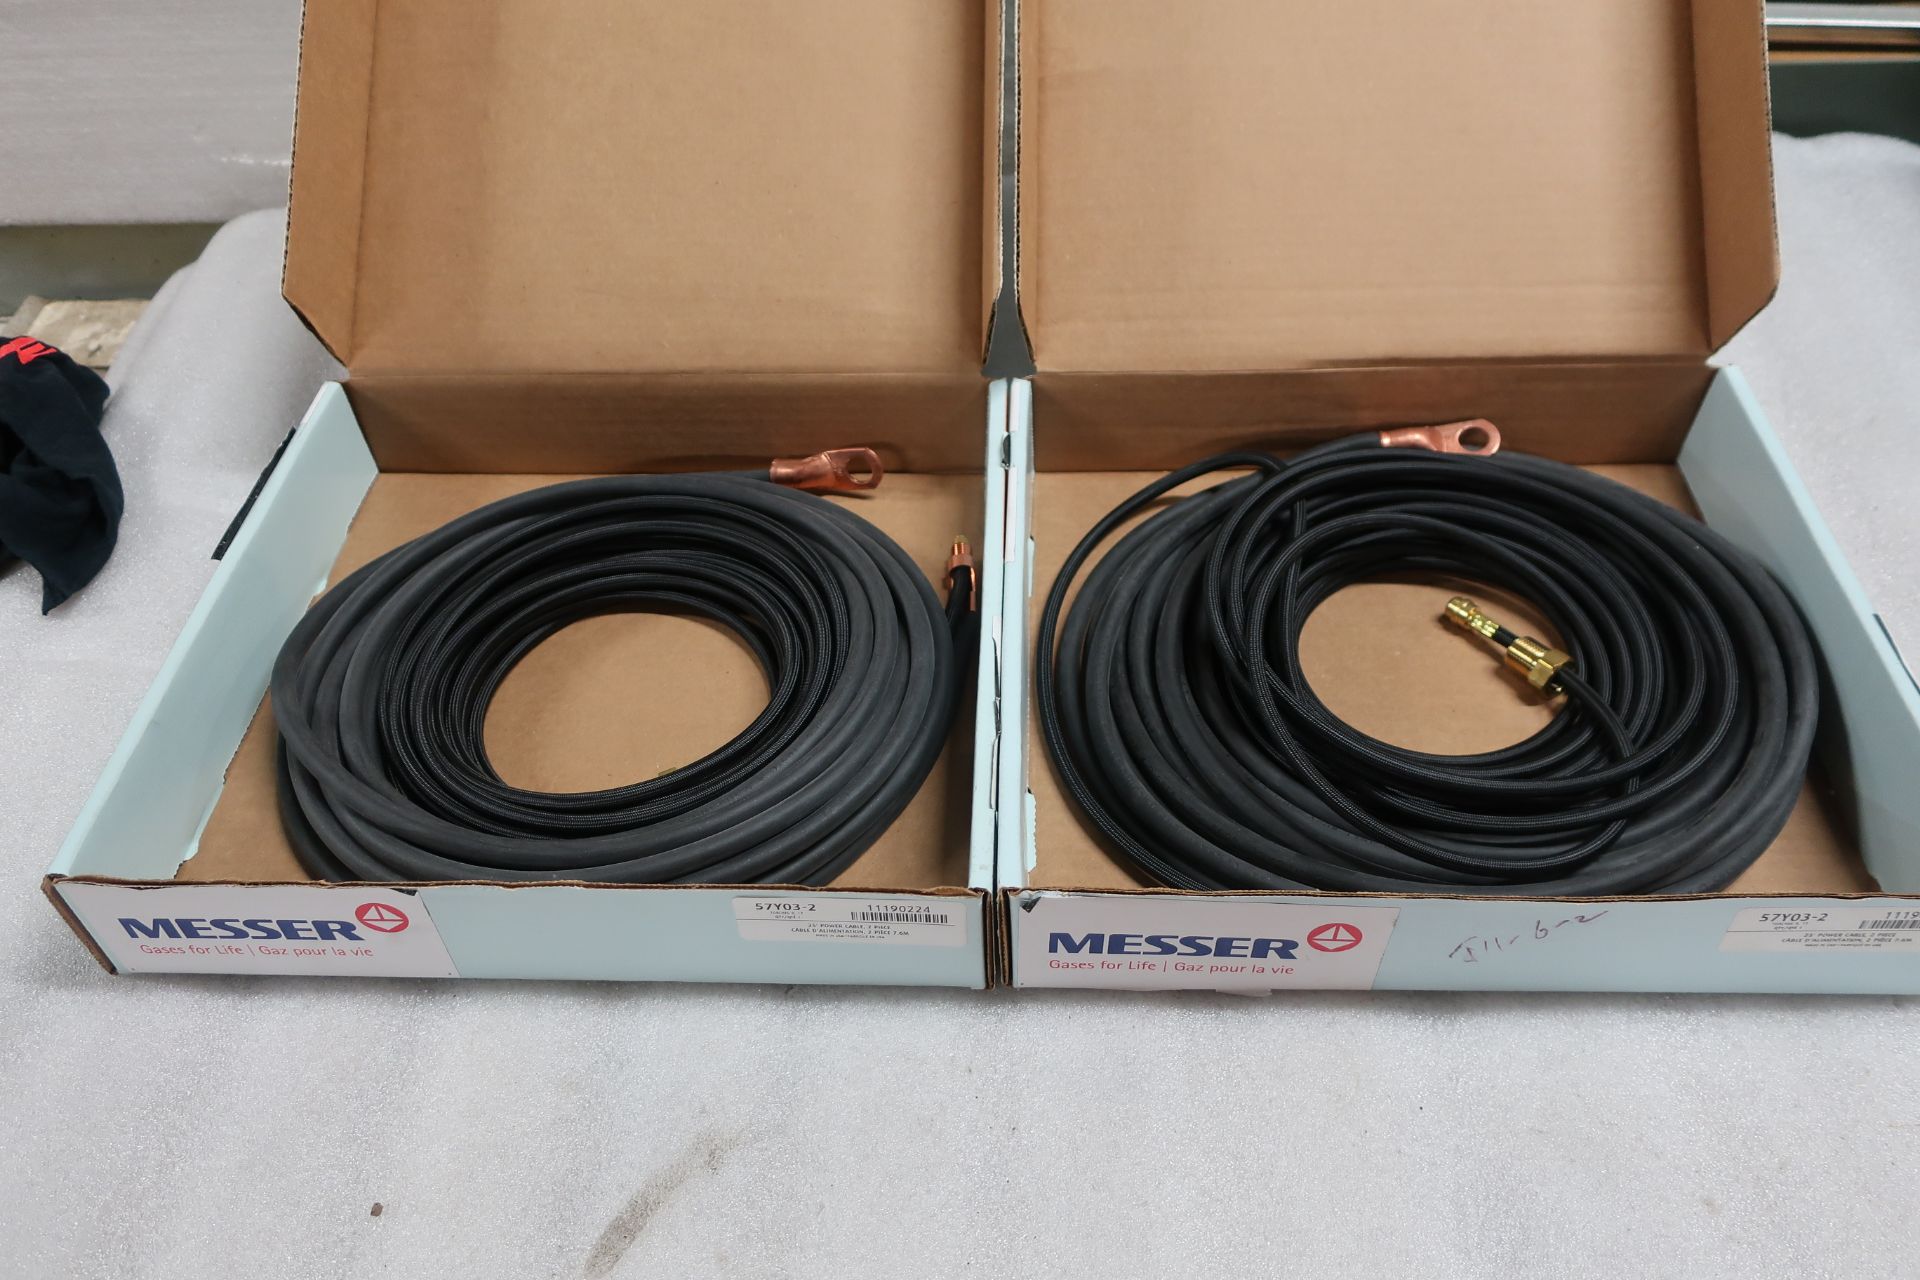 Lot of 2 (2 units) Brand New Messer Gas Hoses